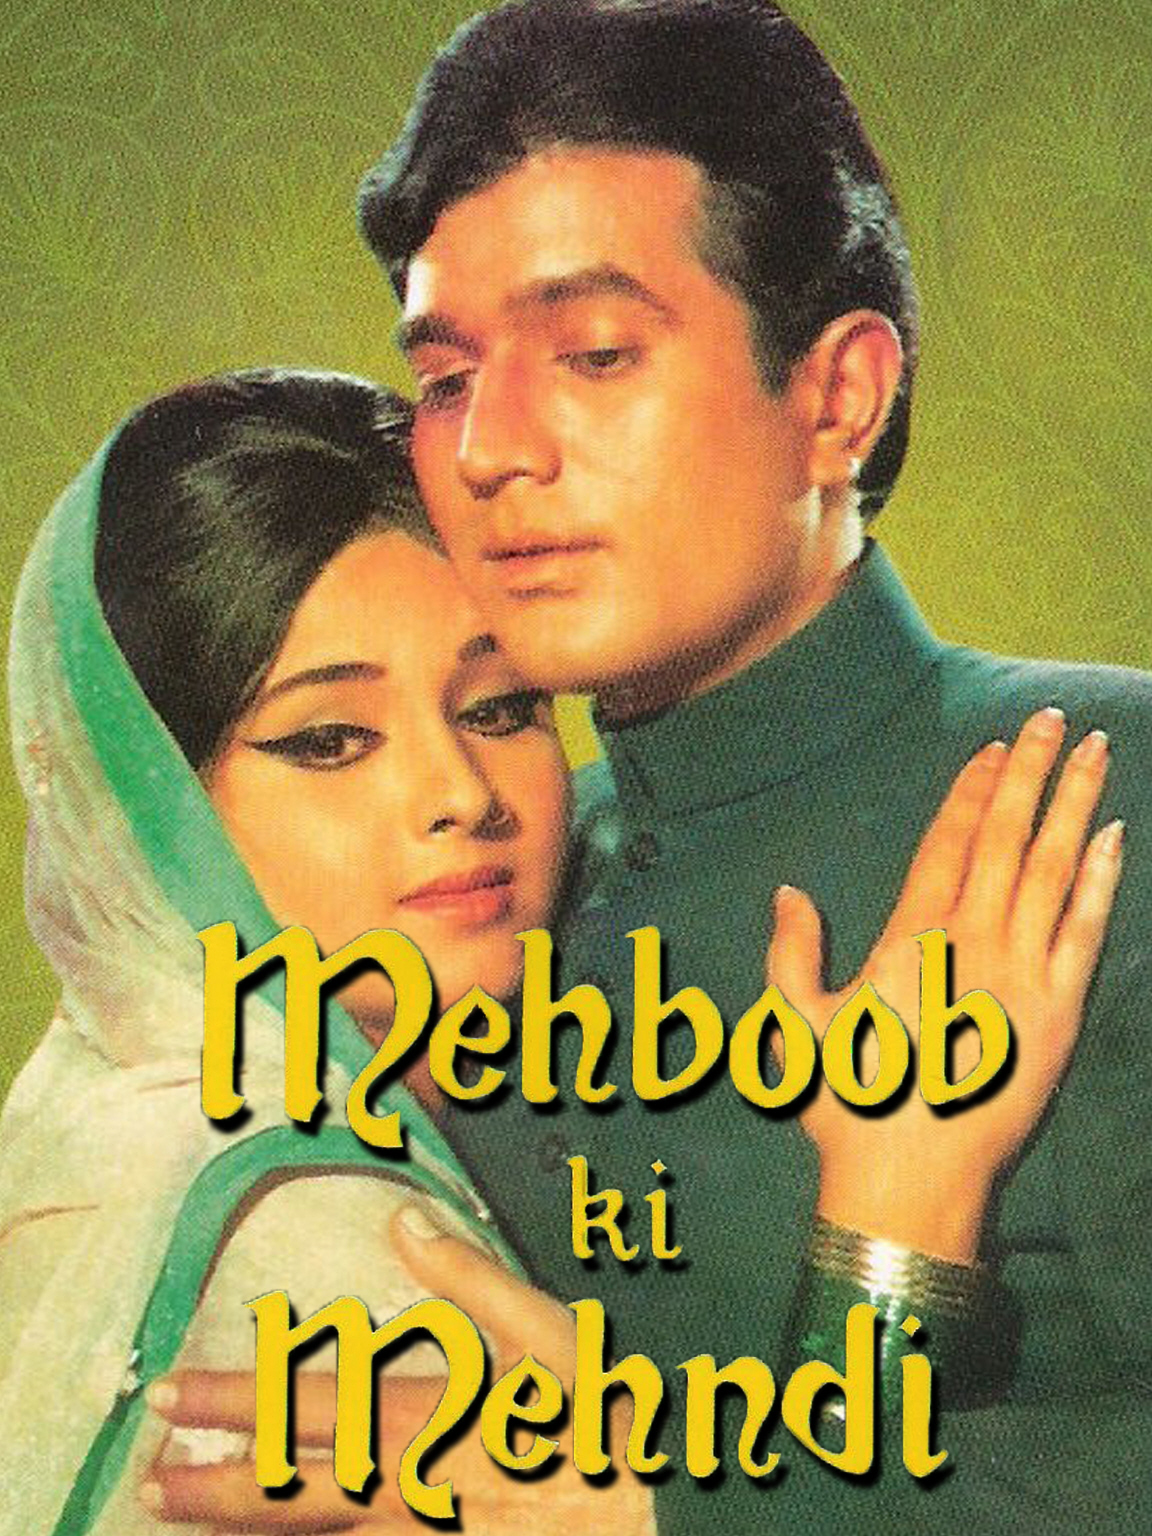 Box Office Record Book: Rajesh Khanna - The First & The Only Indian  Superstar To Deliver Back-To-Back 15 Solo Successes!